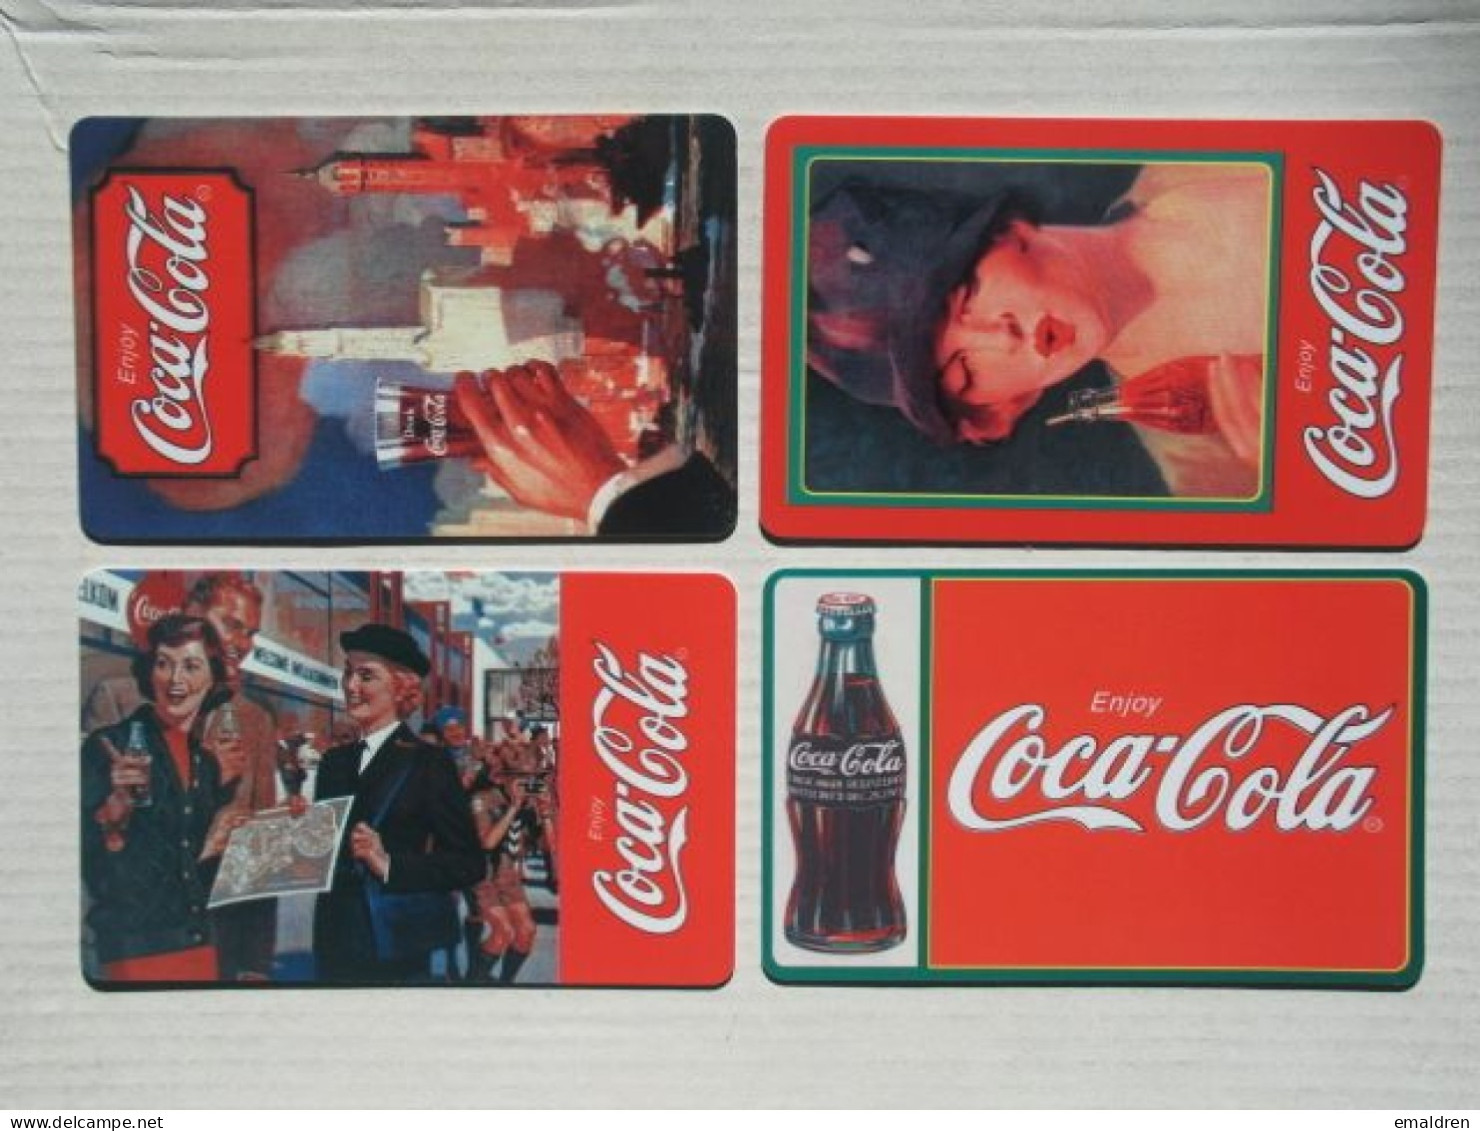 In Touch: Coca-Cola - [2] Prepaid & Refill Cards